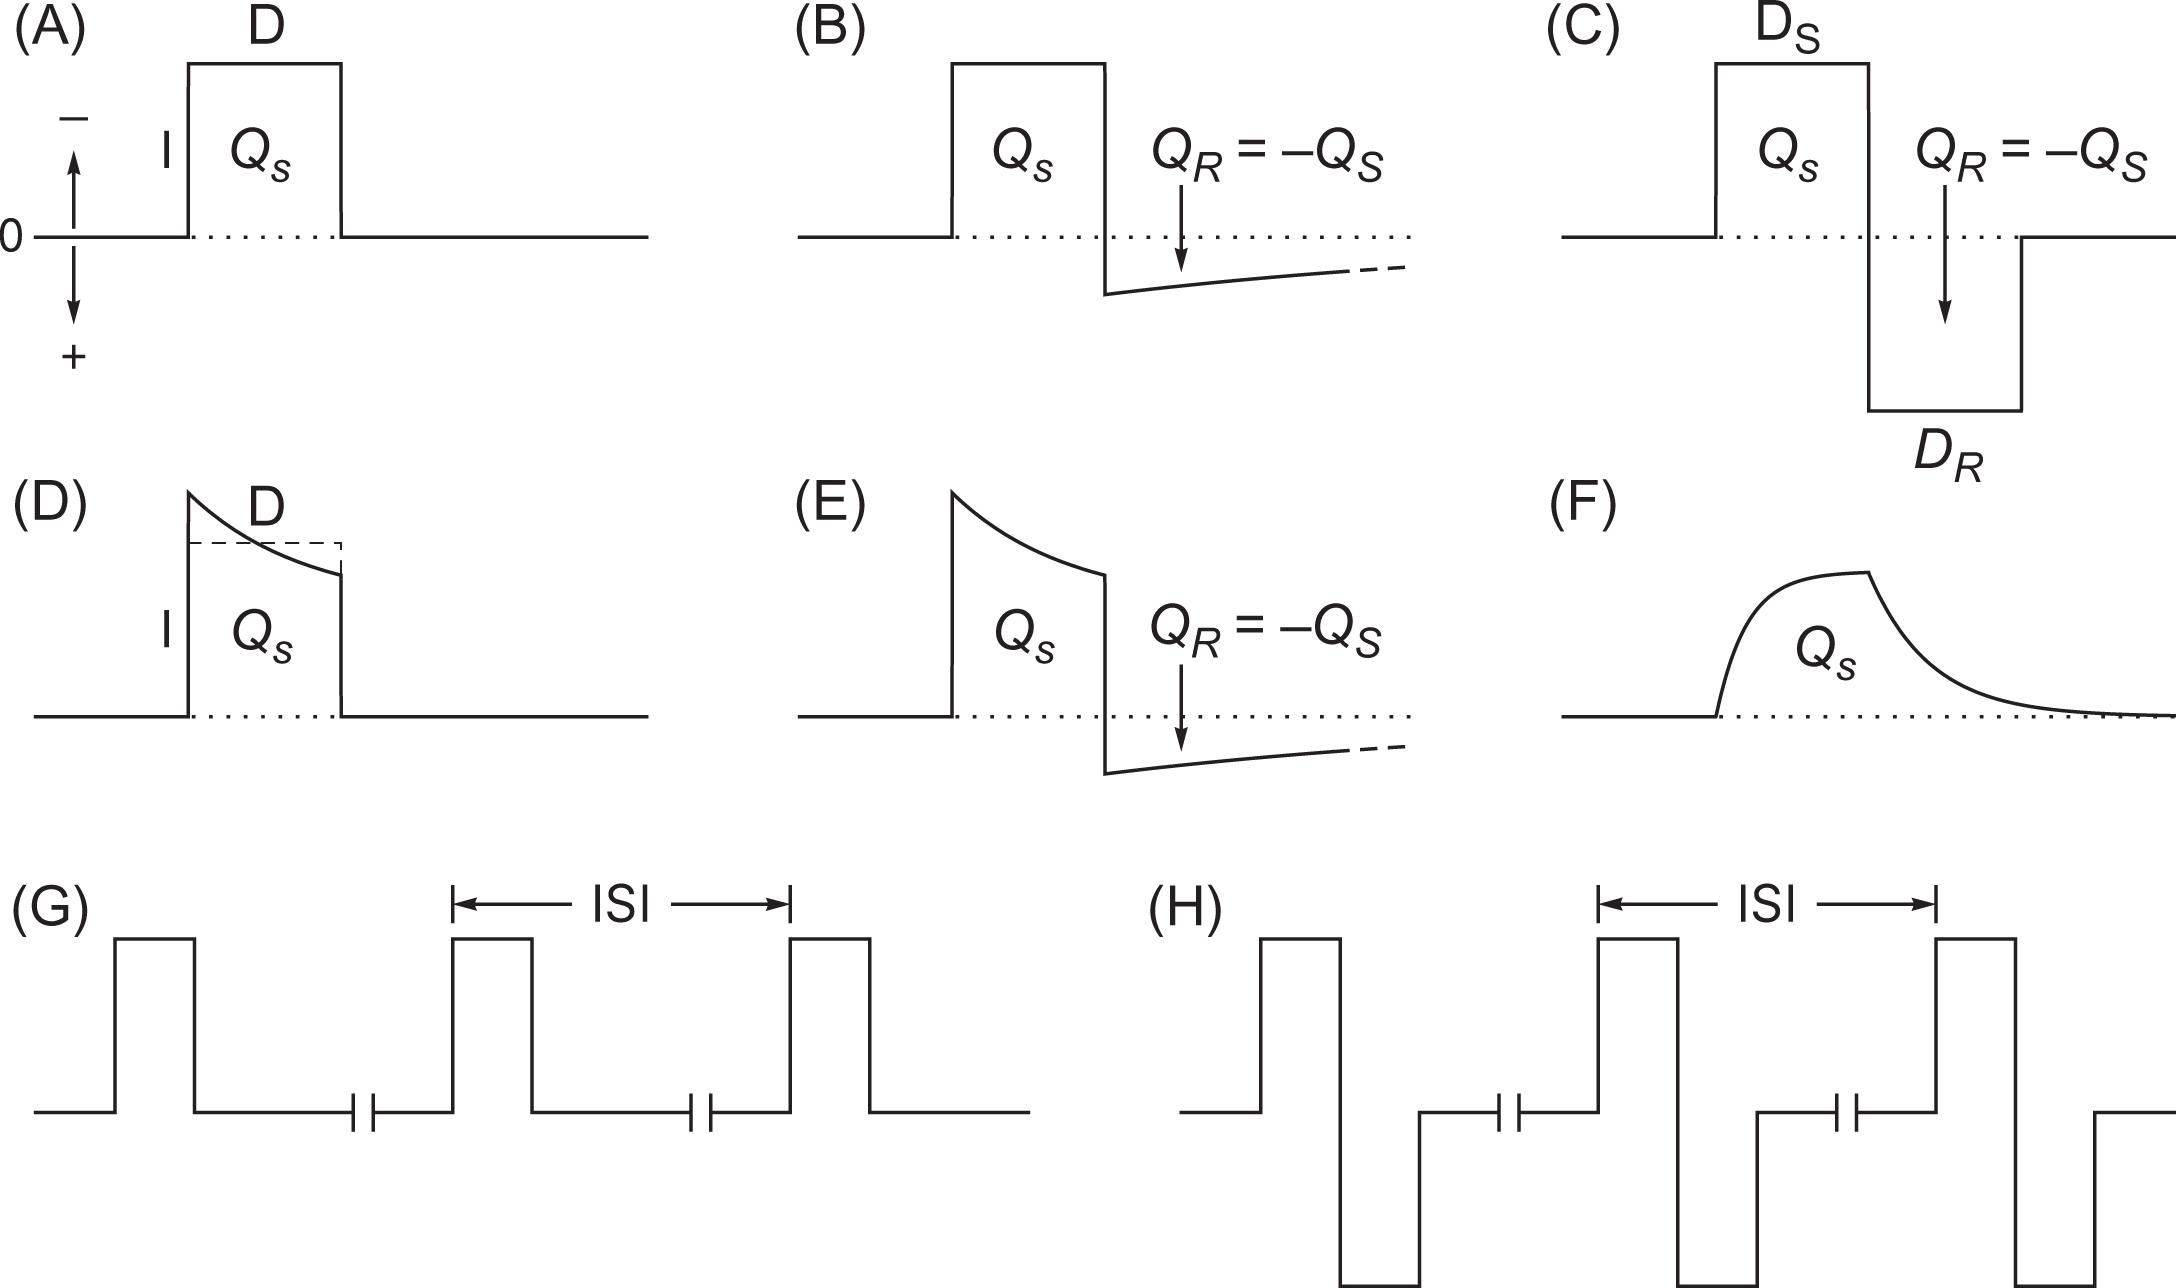 Figure 41.1, Various pulses of equivalent stimulus charge ( Q S ). (A) Monophasic constant-current with QS=I×D QS=I×D . (B) Constant-current stimulus with asymmetric charge reversal. (C) Biphasic constant-current with symmetric reversal. (D) Monophasic constant-voltage with exponential decay and comparison to a constant-current pulse ( dashed line ). (E) Constant-voltage with asymmetric charge reversal. (F) Load-distorted monophasic constant-voltage pulse. (G) Monophasic constant-current train. (H) Symmetric biphasic constant-current train. D , Duration; D S and D R , stimulus and reversal duration; I , current; ISI , interstimulus interval; Q R , reversal charge.